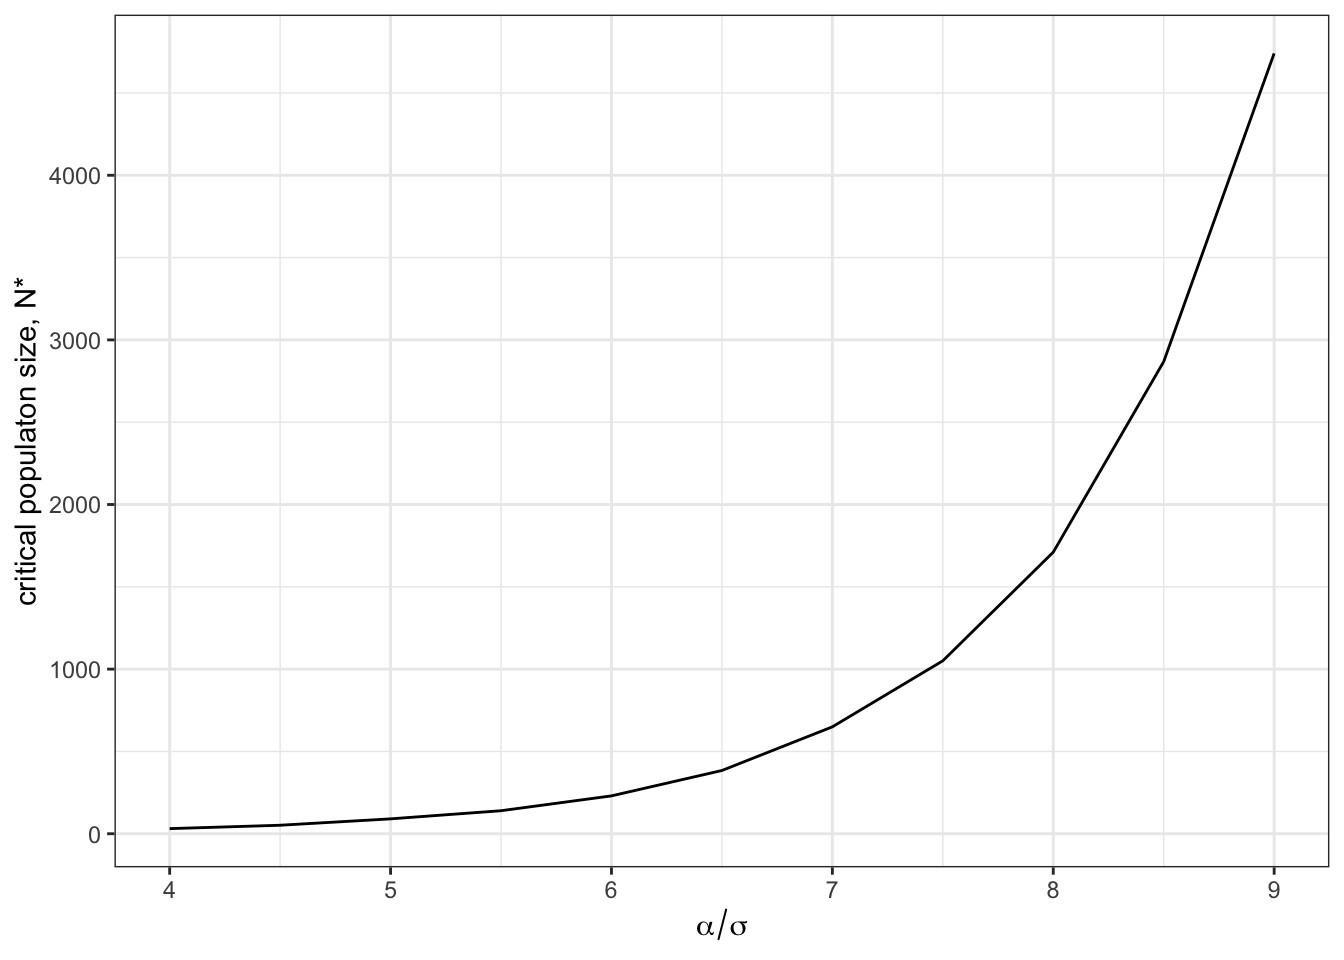 The critical population size, $N^\star$, increases exponentially as skill complexity increases.